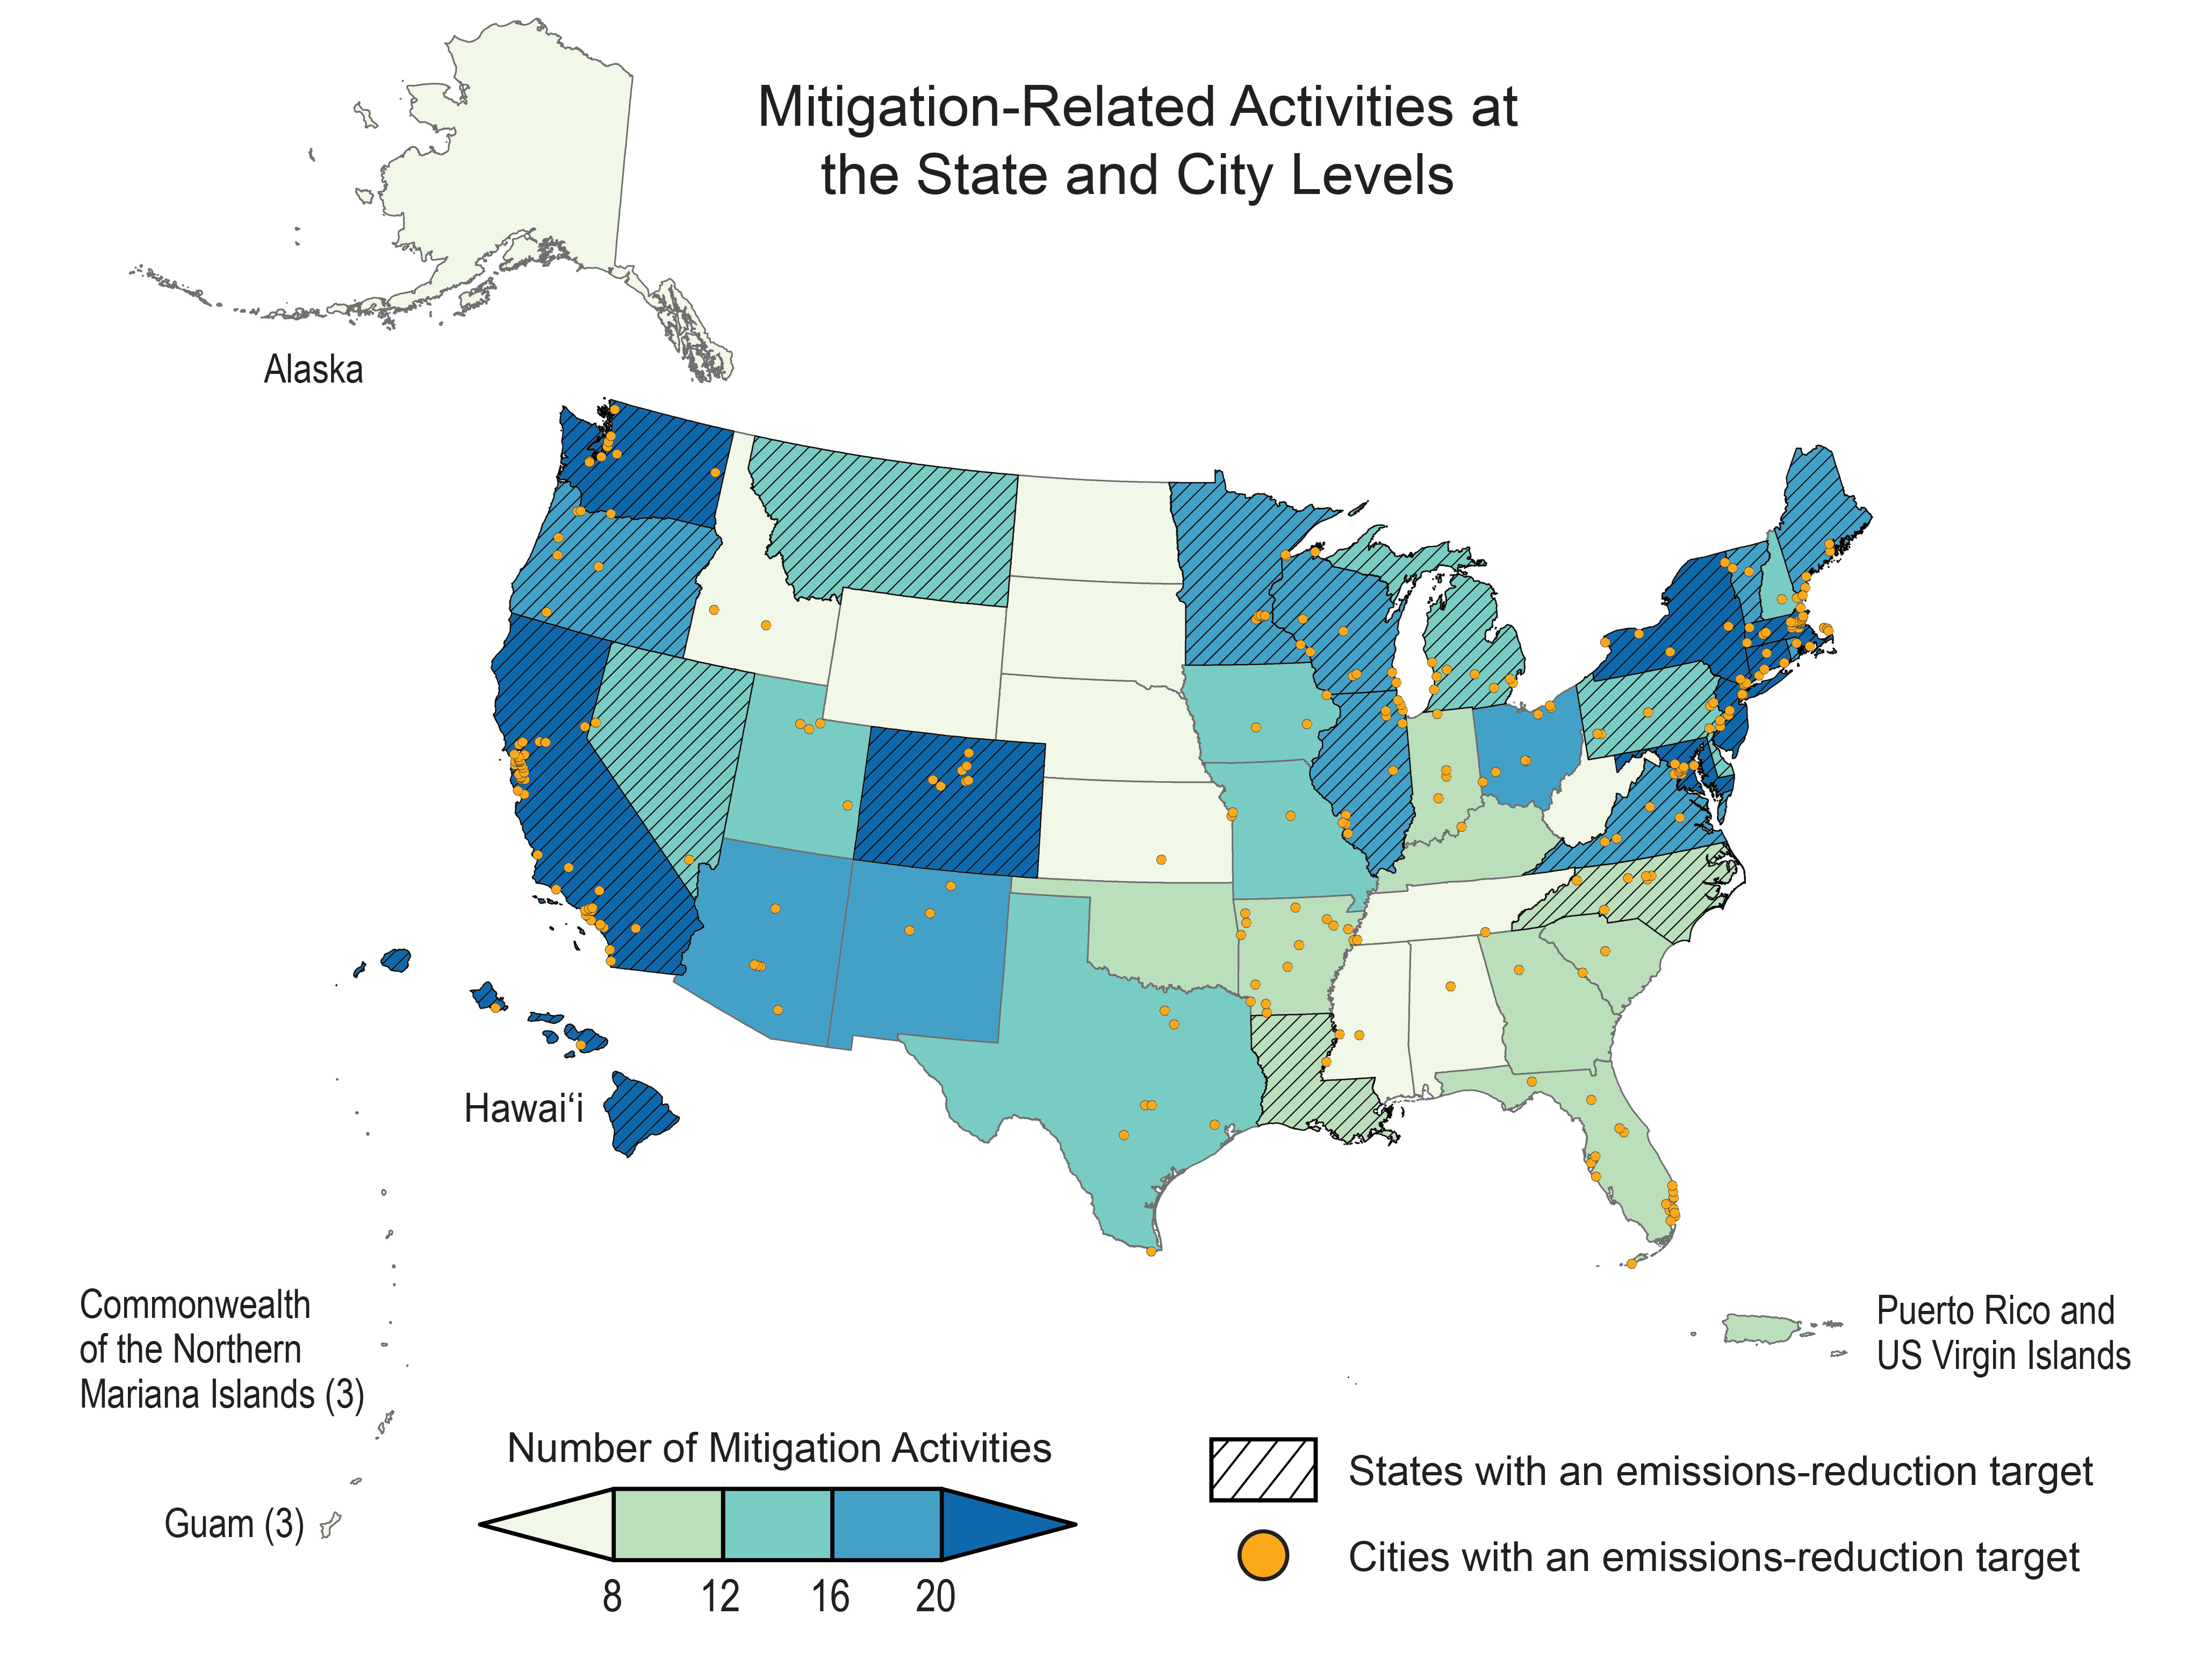 Mitigation-Related Activities at the State and City Levels